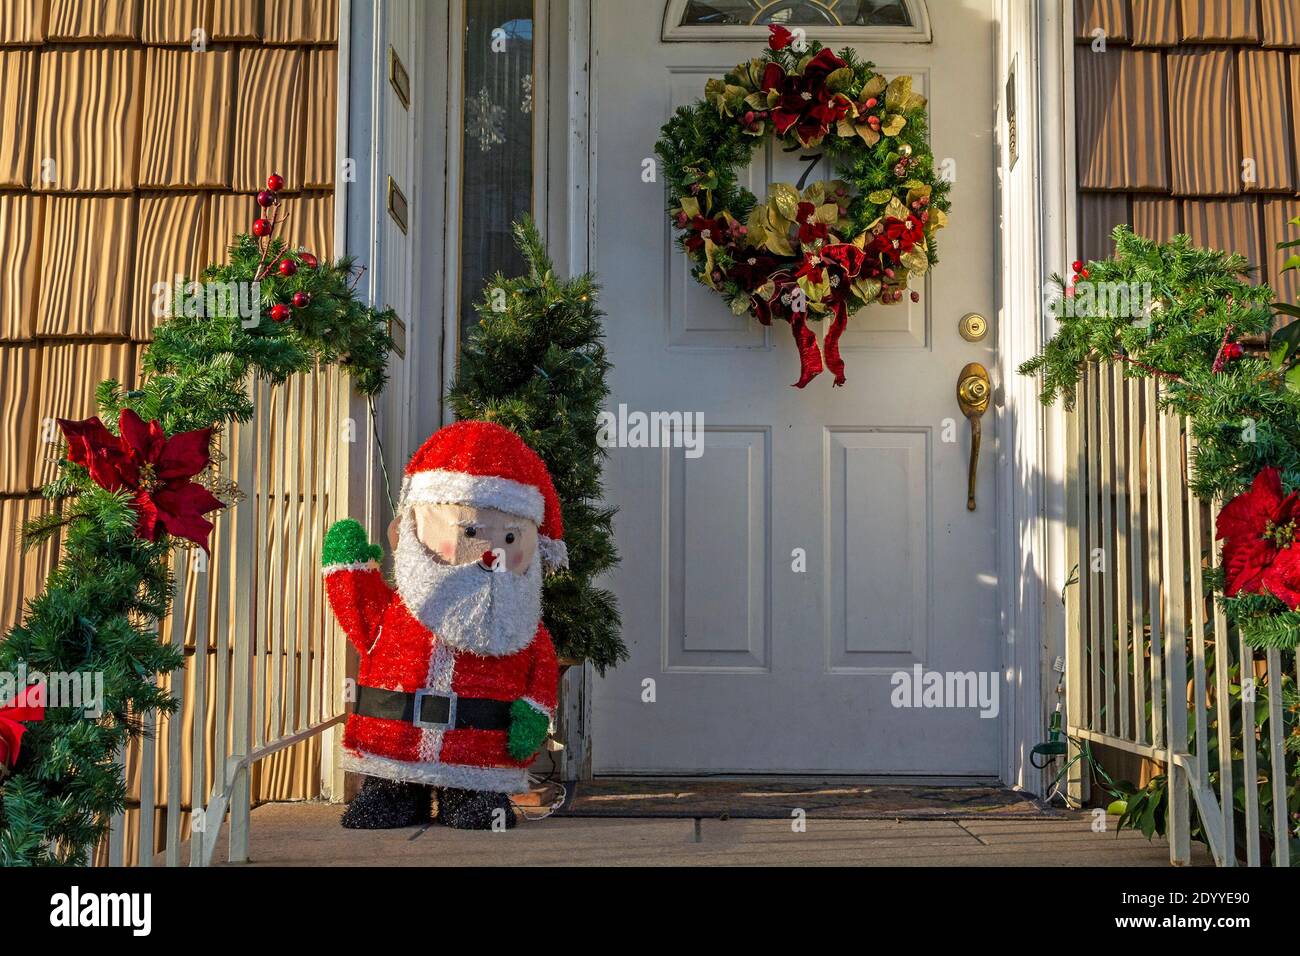 Christmas Decorations on Front Porch of an Urban Townhouse Stock Photo